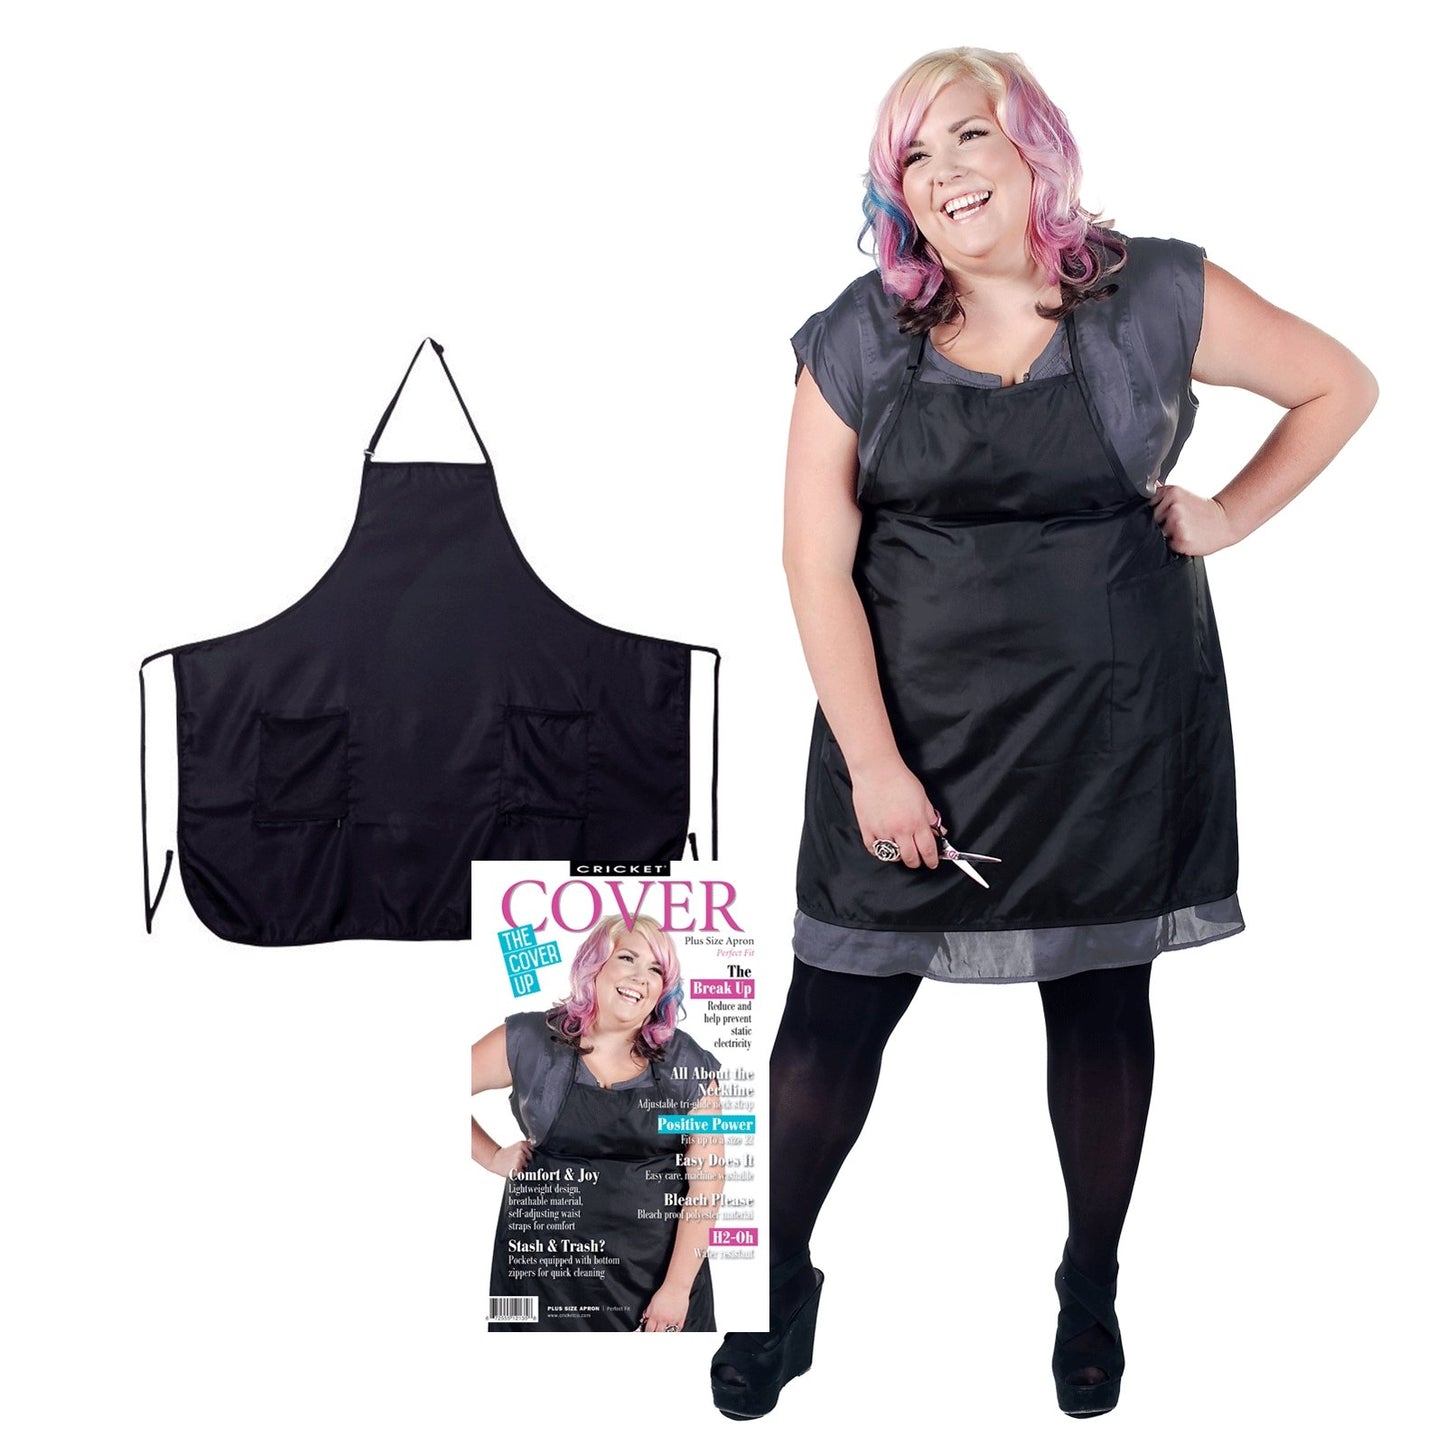 The cover Up | Plus Size Apron | Perfect Fit | CRICKET - SH Salons